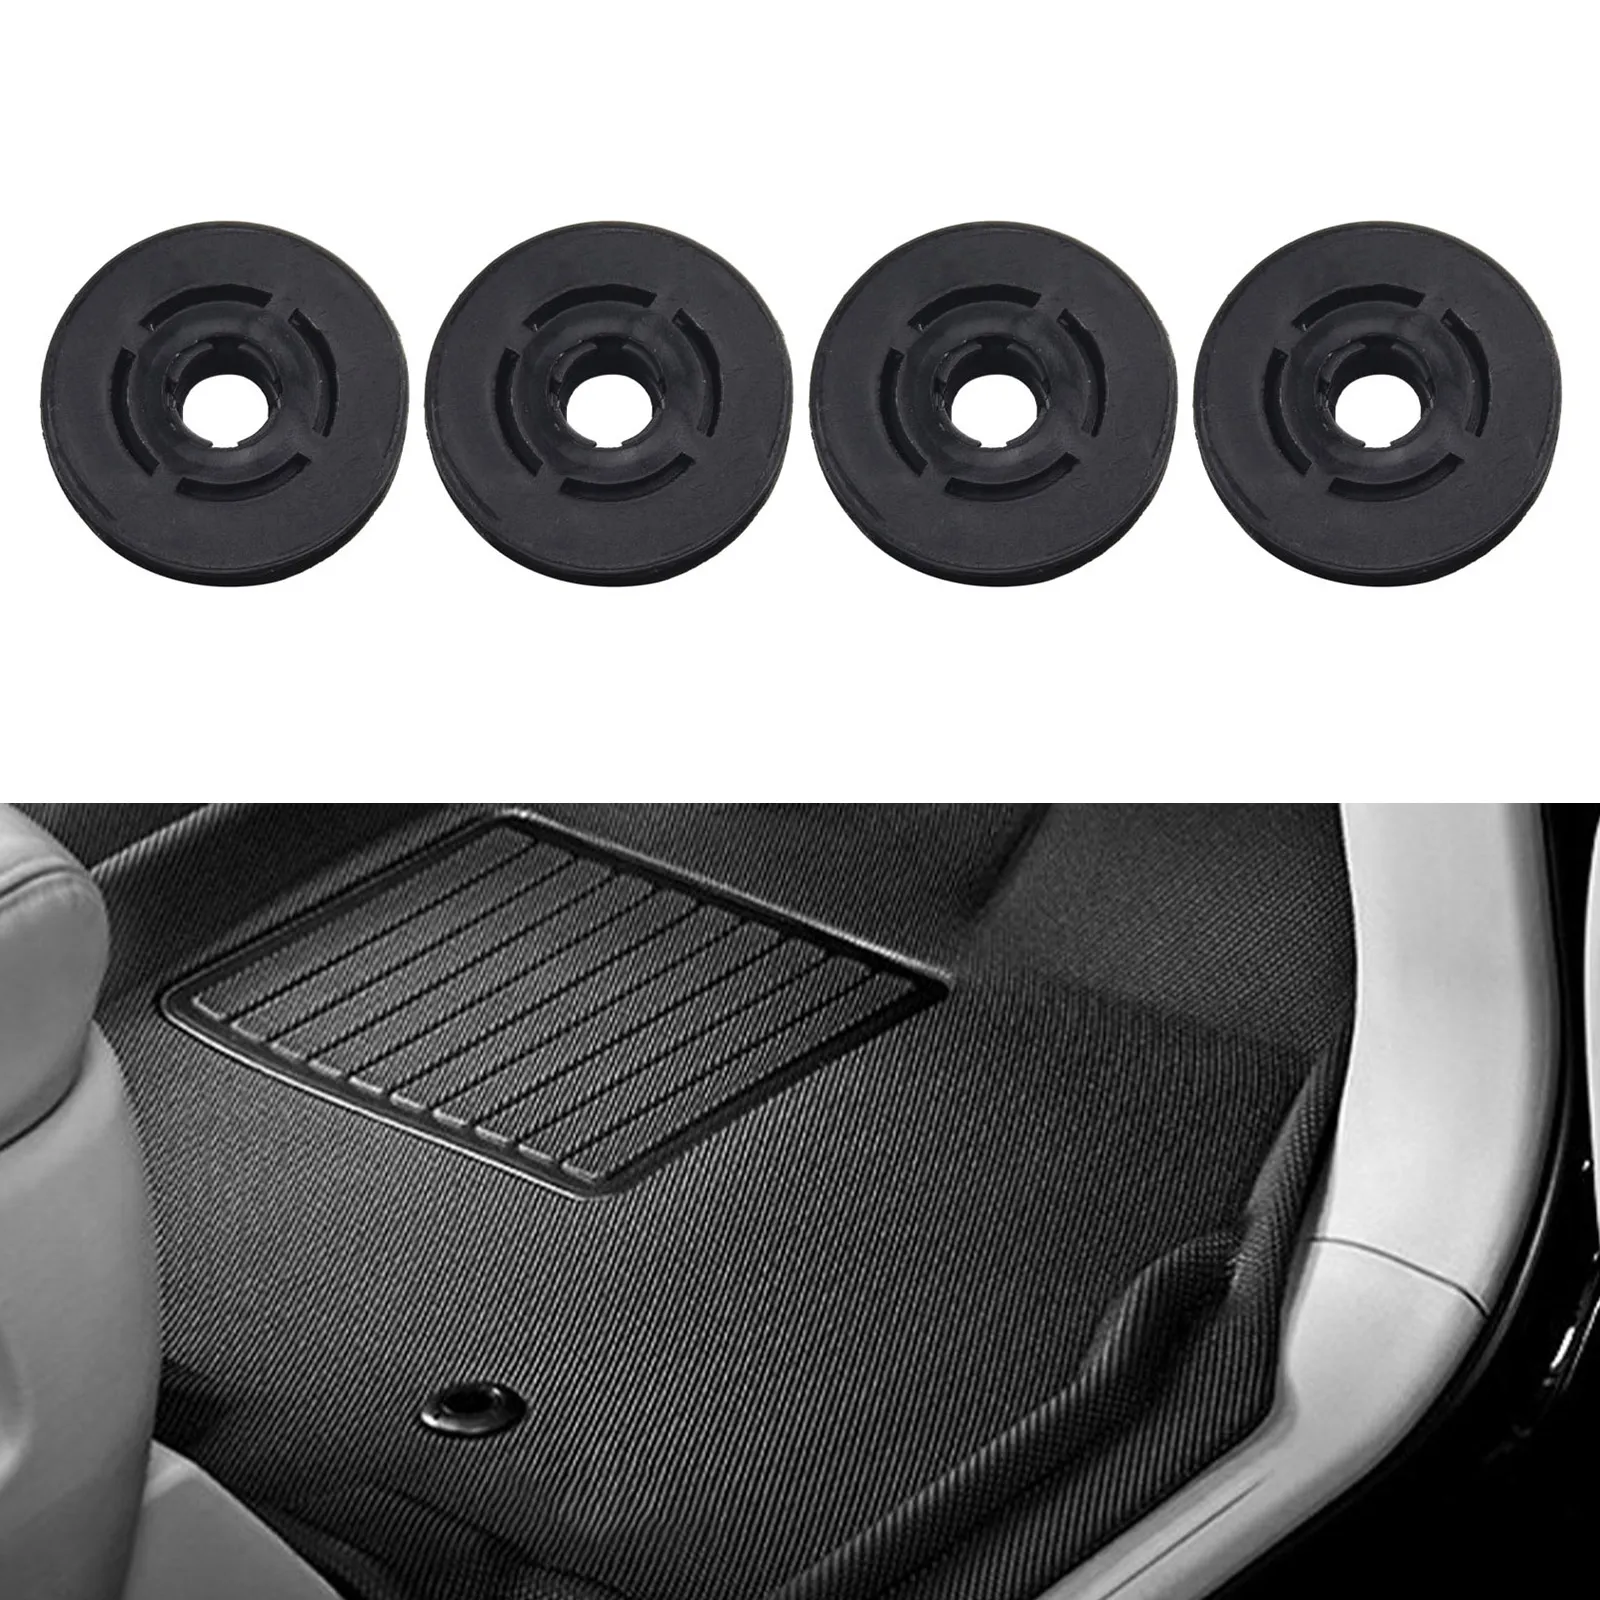 

Accessories Fixing Clips Car Floor Holders For Grips Clamps Mat Parts Replacement Retention High Quality Practical Durable